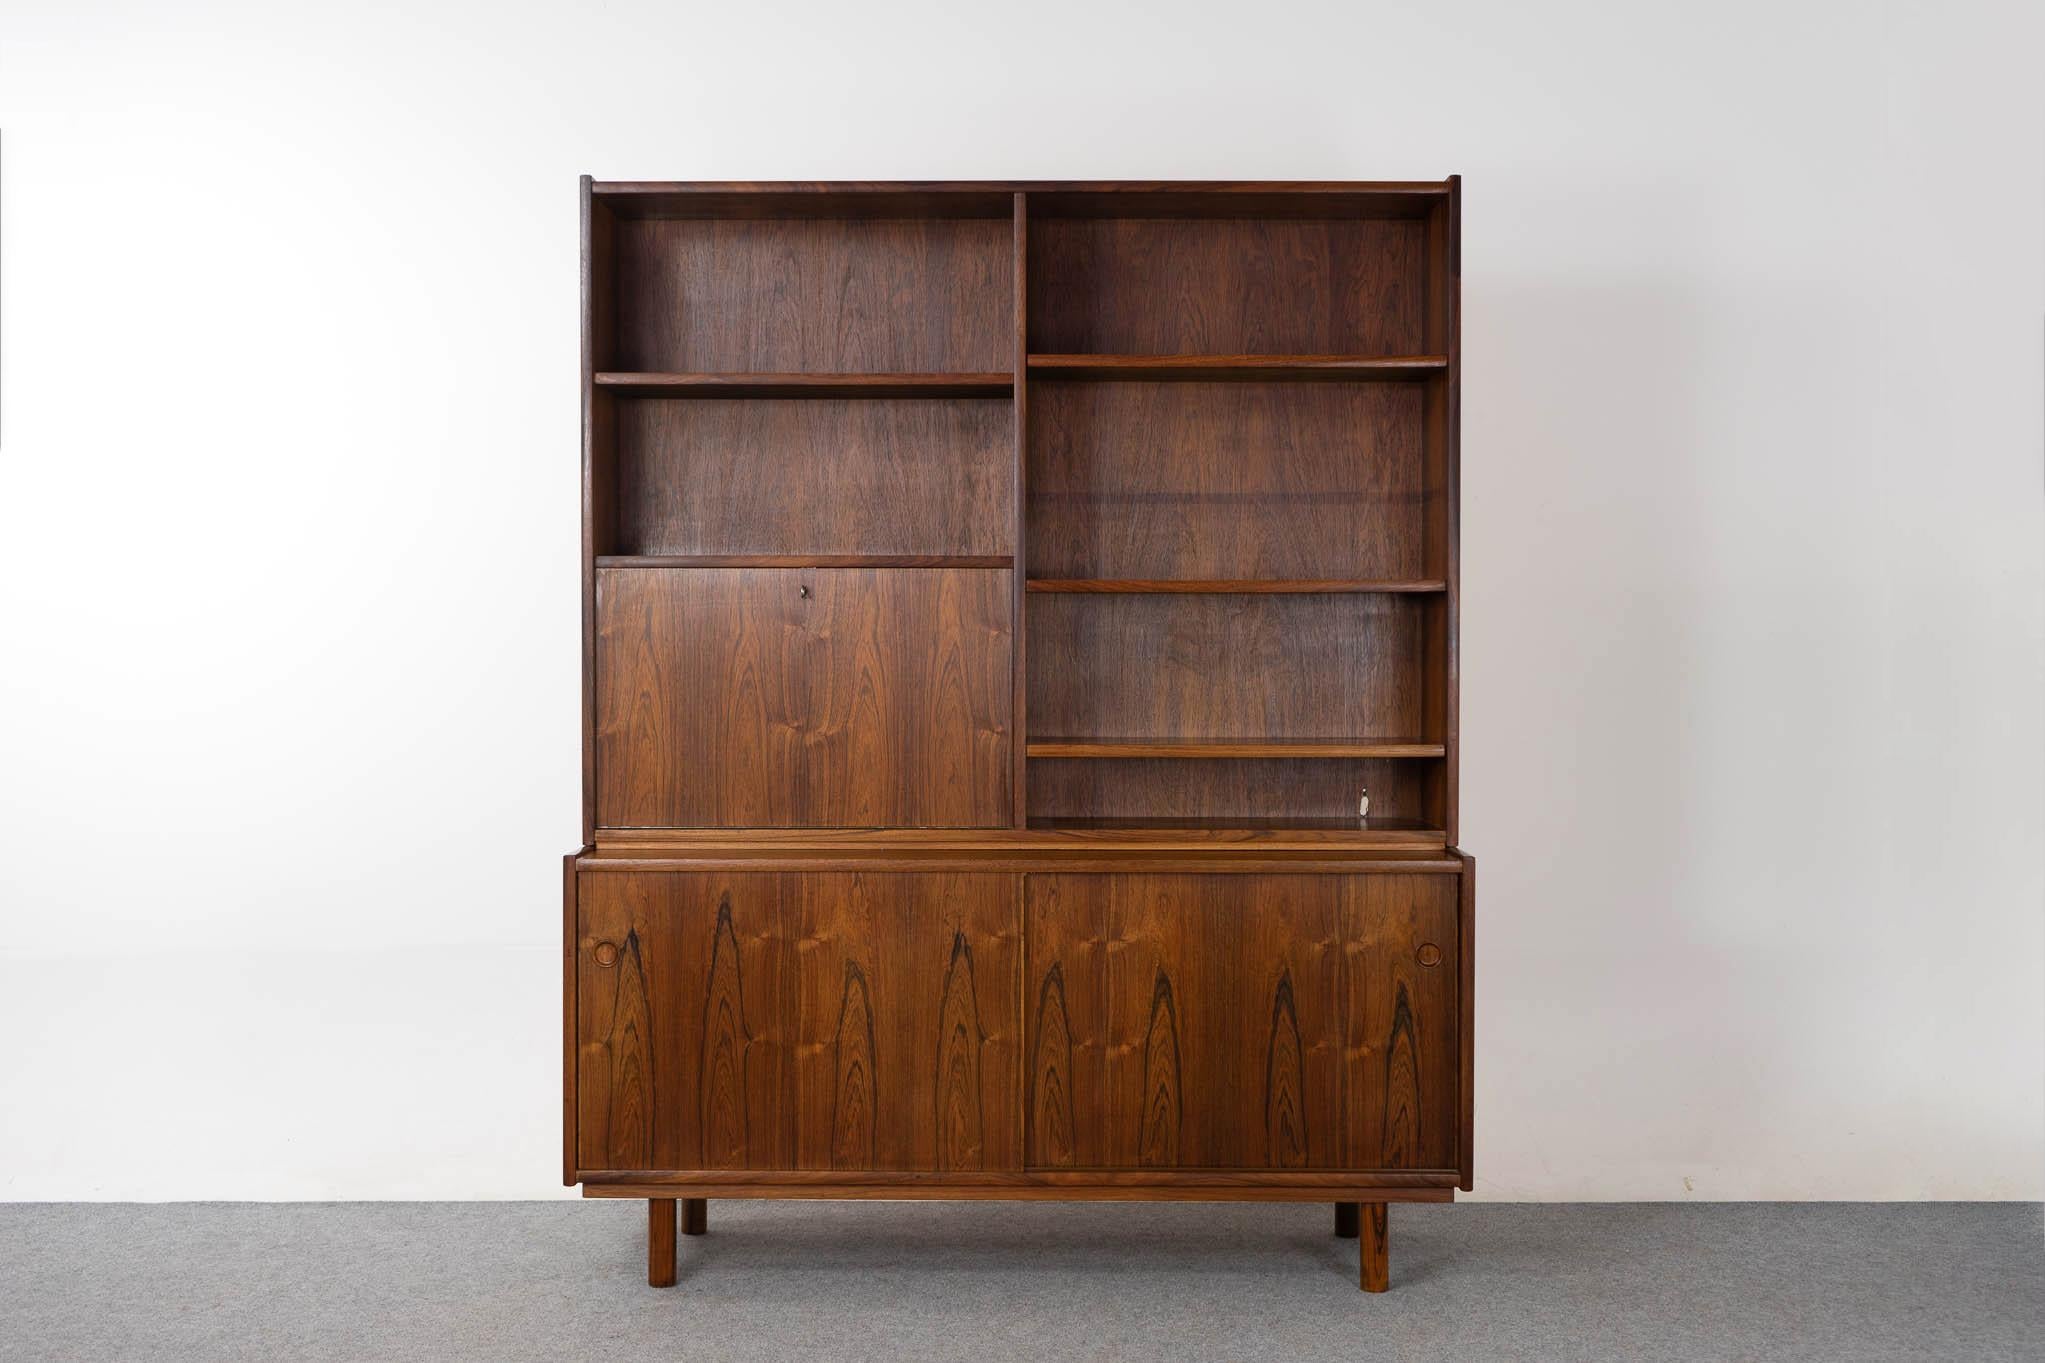 Rosewood Danish modern bookcase/cabinet, circa 1960's. Open bookcase and drop down desk with fitted interior. Lower section with sliding door cabinet, adjustable shelving and slim, sleek drawers. Bookcase rests upon lower cabinet, can be used